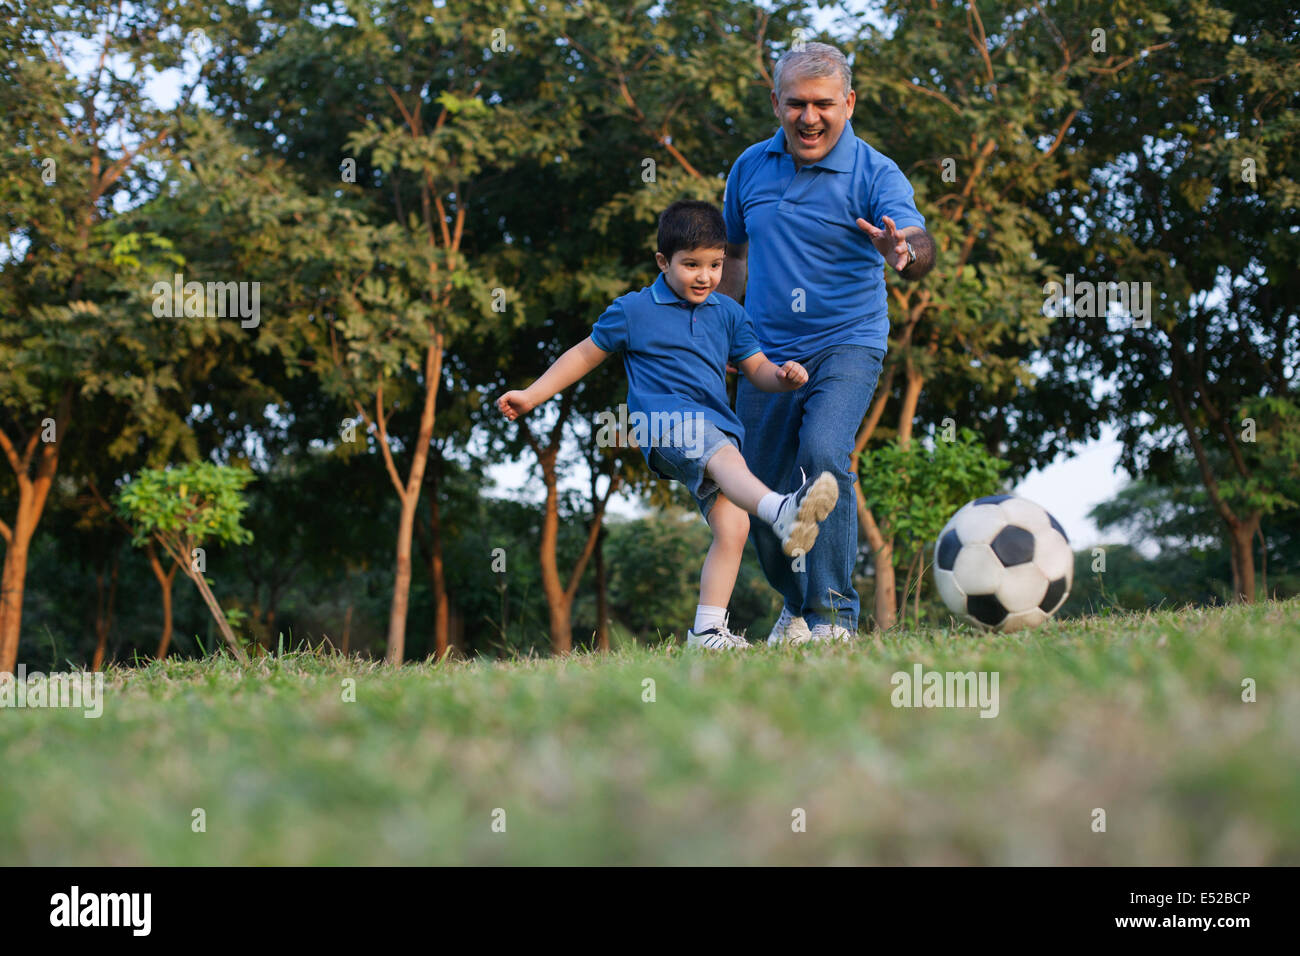 Grandfather and grandson playing soccer Stock Photo